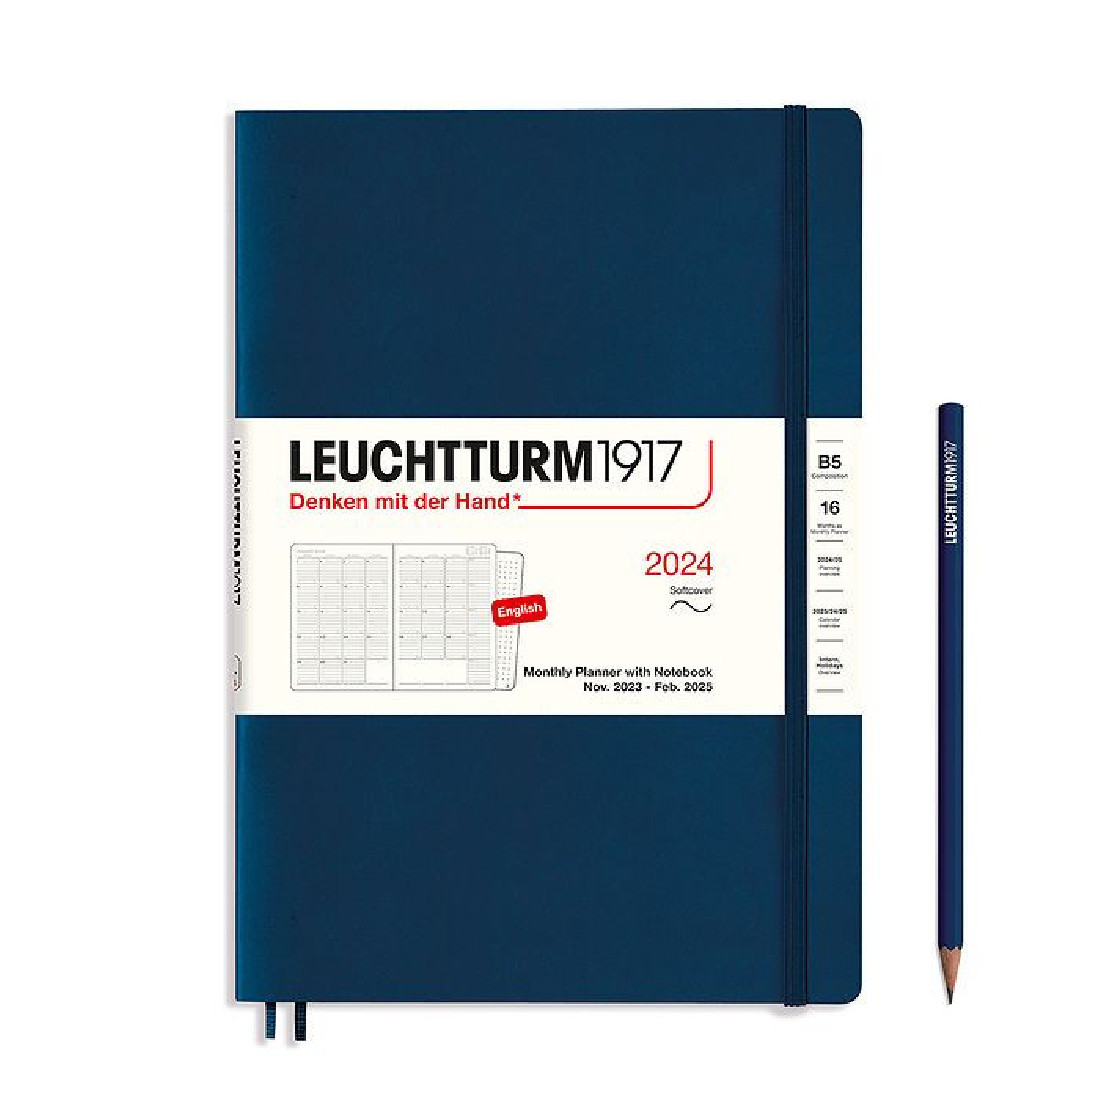 Leuchtturm 1917 Monthly Planner and Notebook 2024 Navy Composition B5 Soft Cover